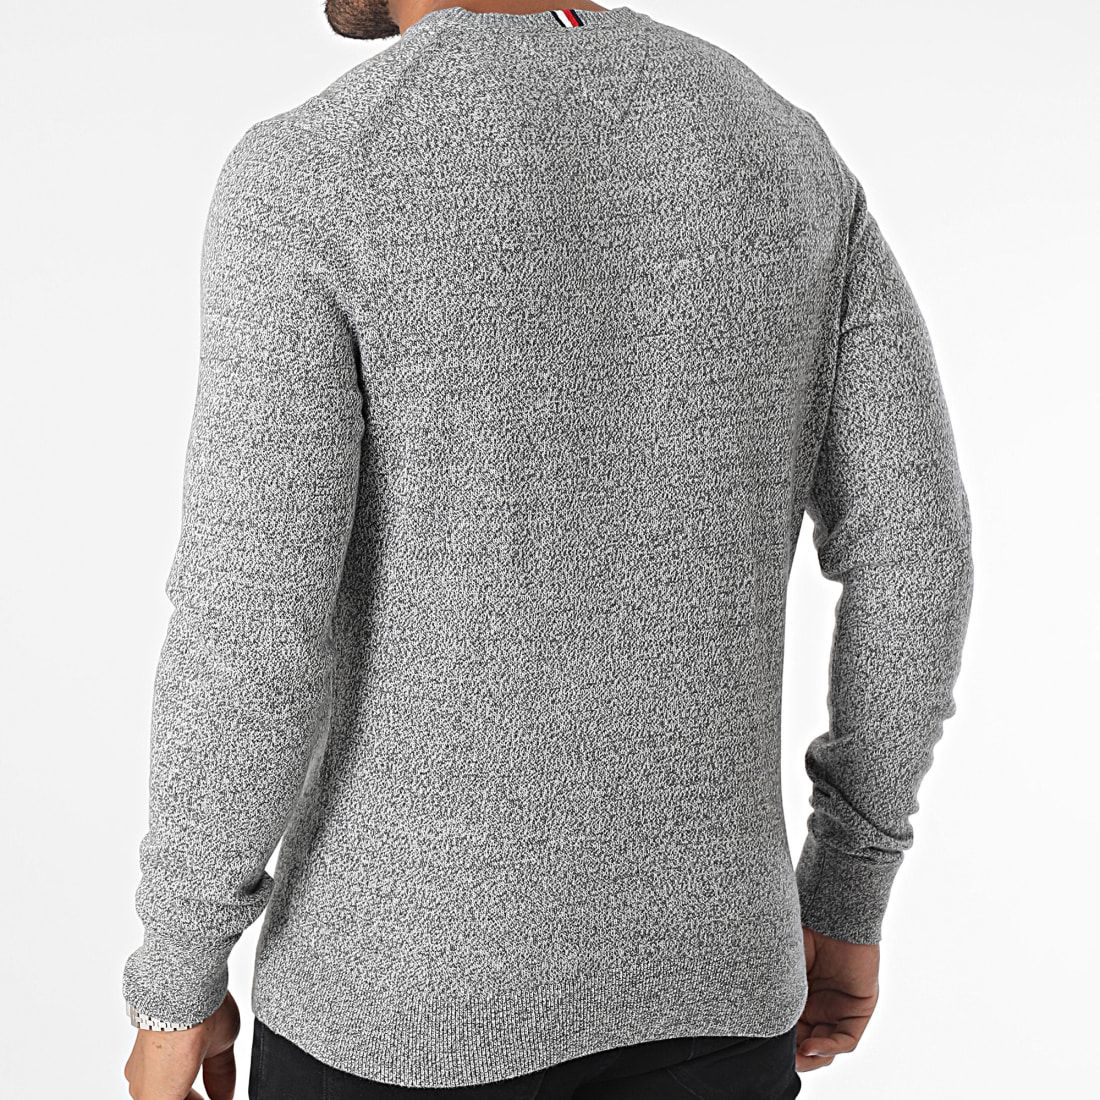 Pull Tommy Hilfiger Pima Perkins Gris Homme